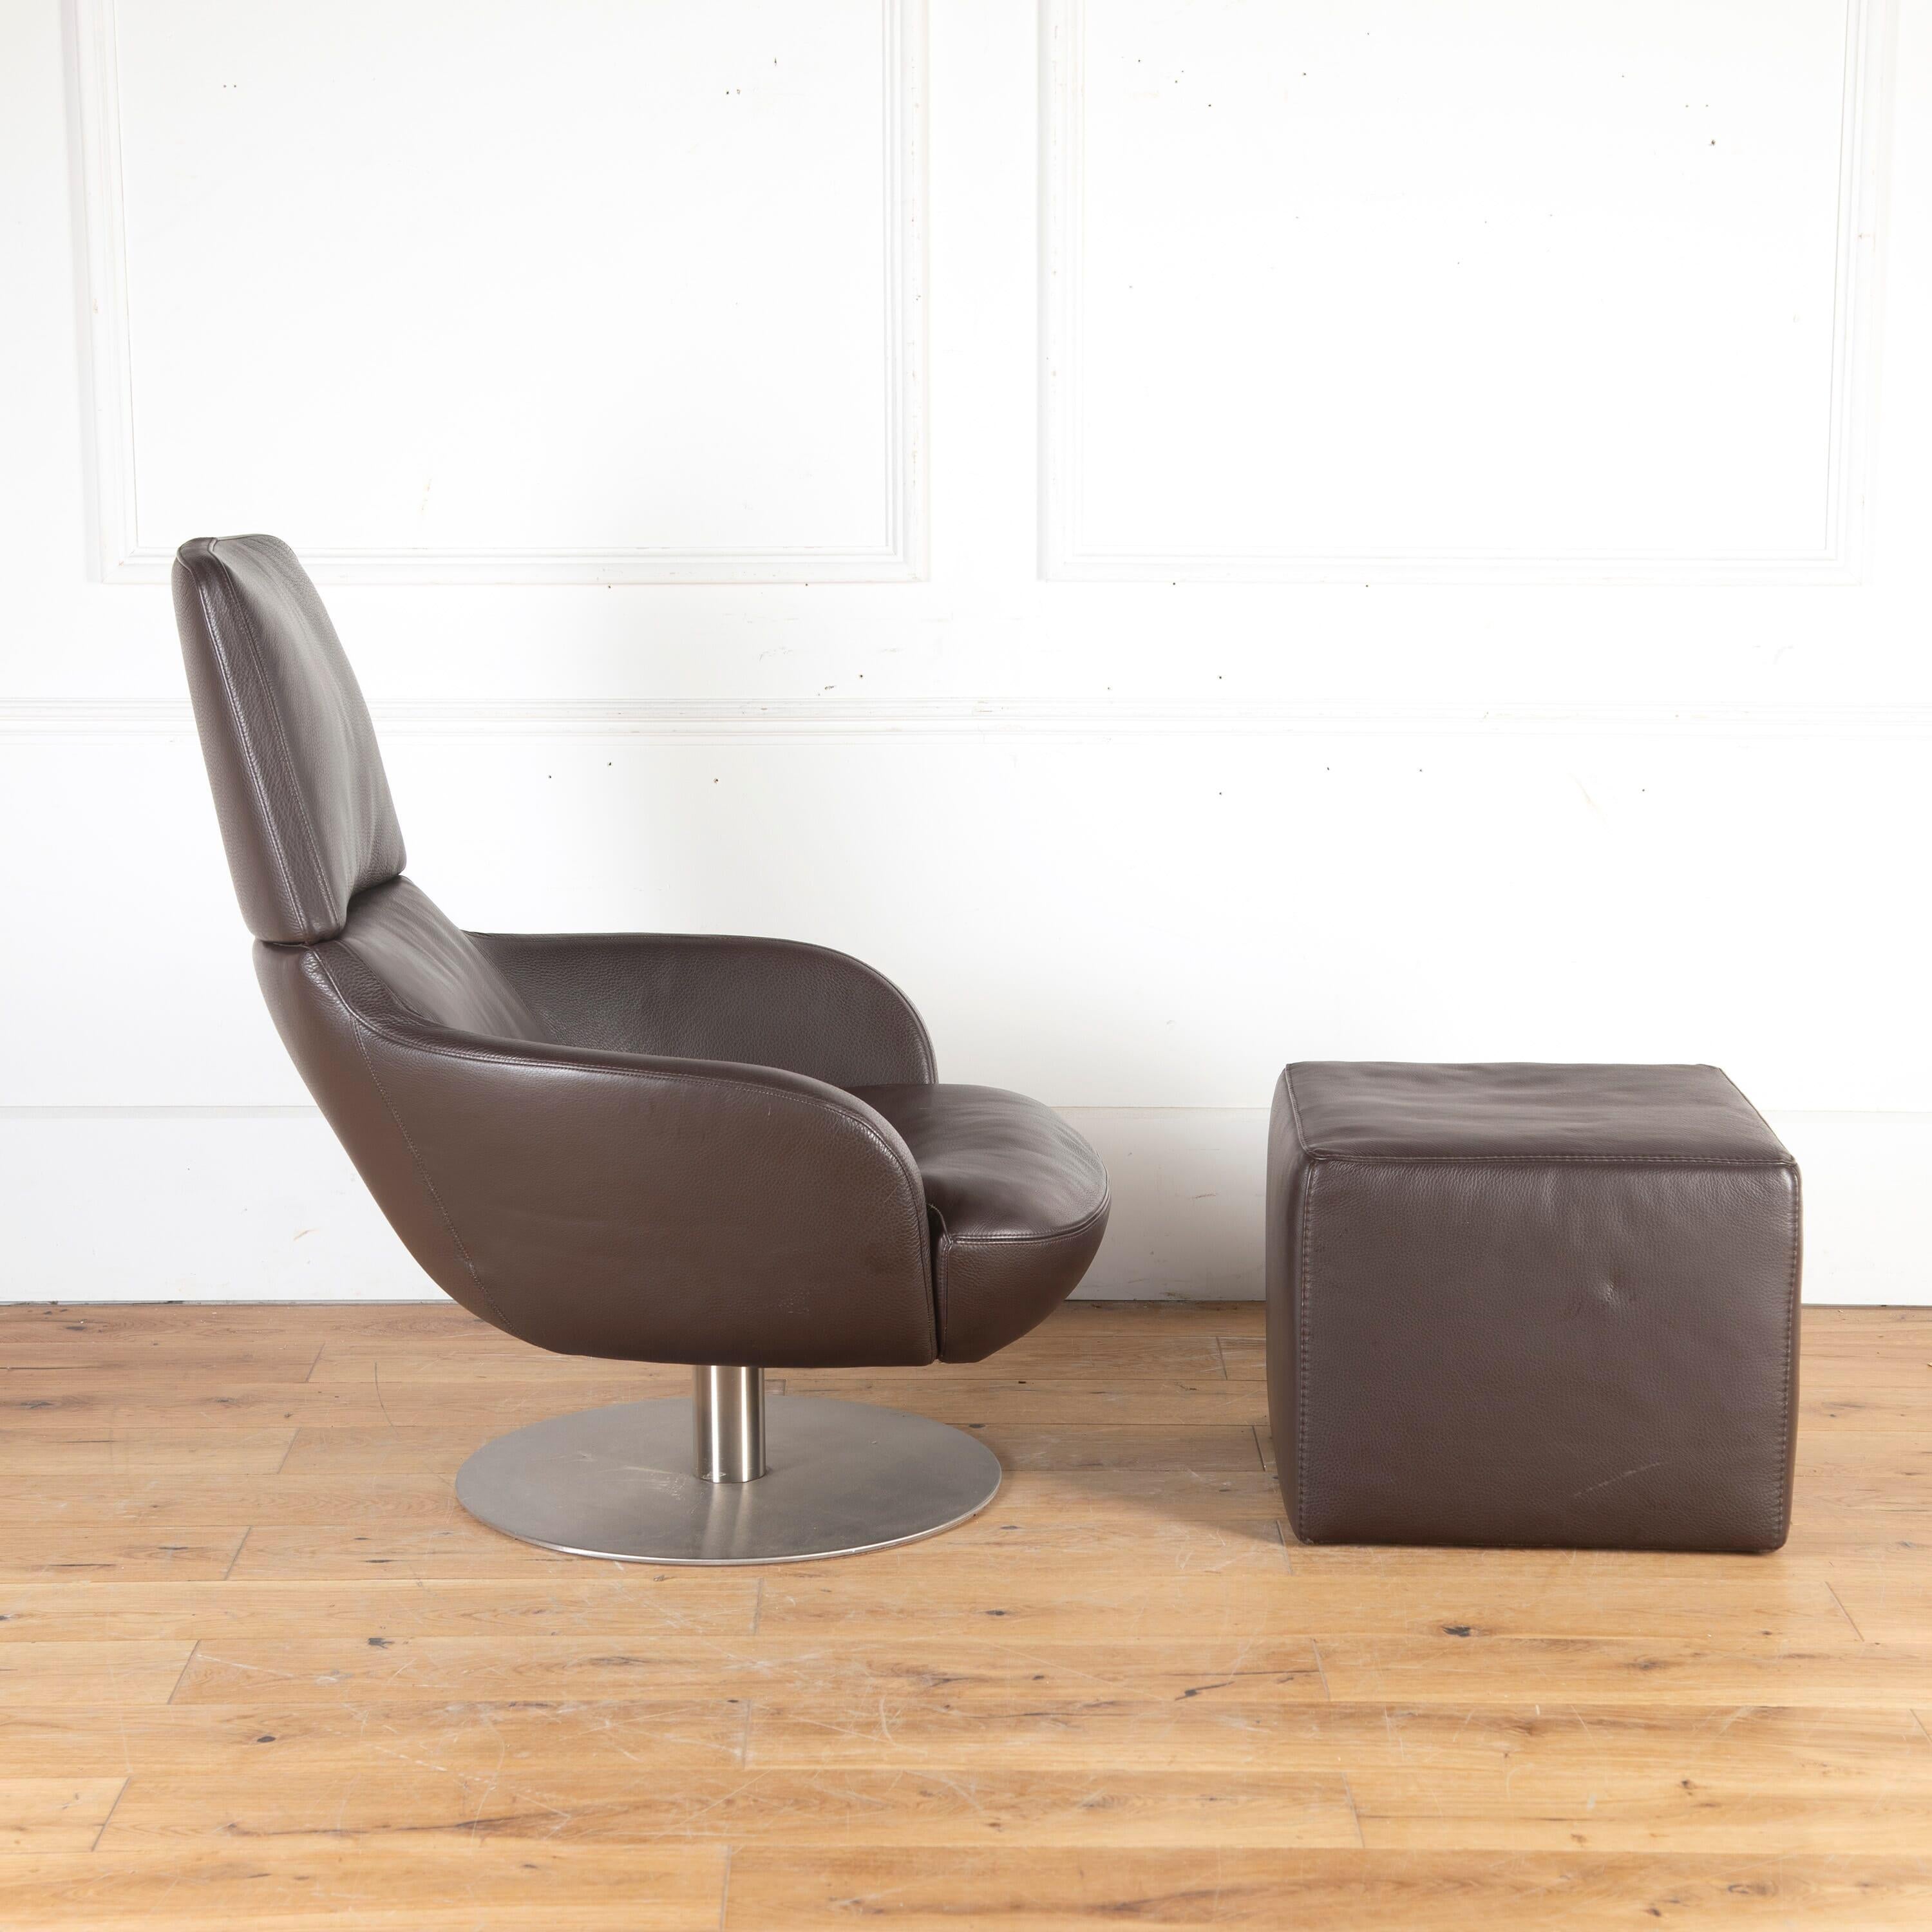 'BREND' Italian leather swivel armchair with matching footstool. By Pasquale Natuzzi Italia.

This stylish set is comprised of a sleek armchair with a gently reclined back and enclosed sides, covered in chocolate brown leather. Resting on a flat